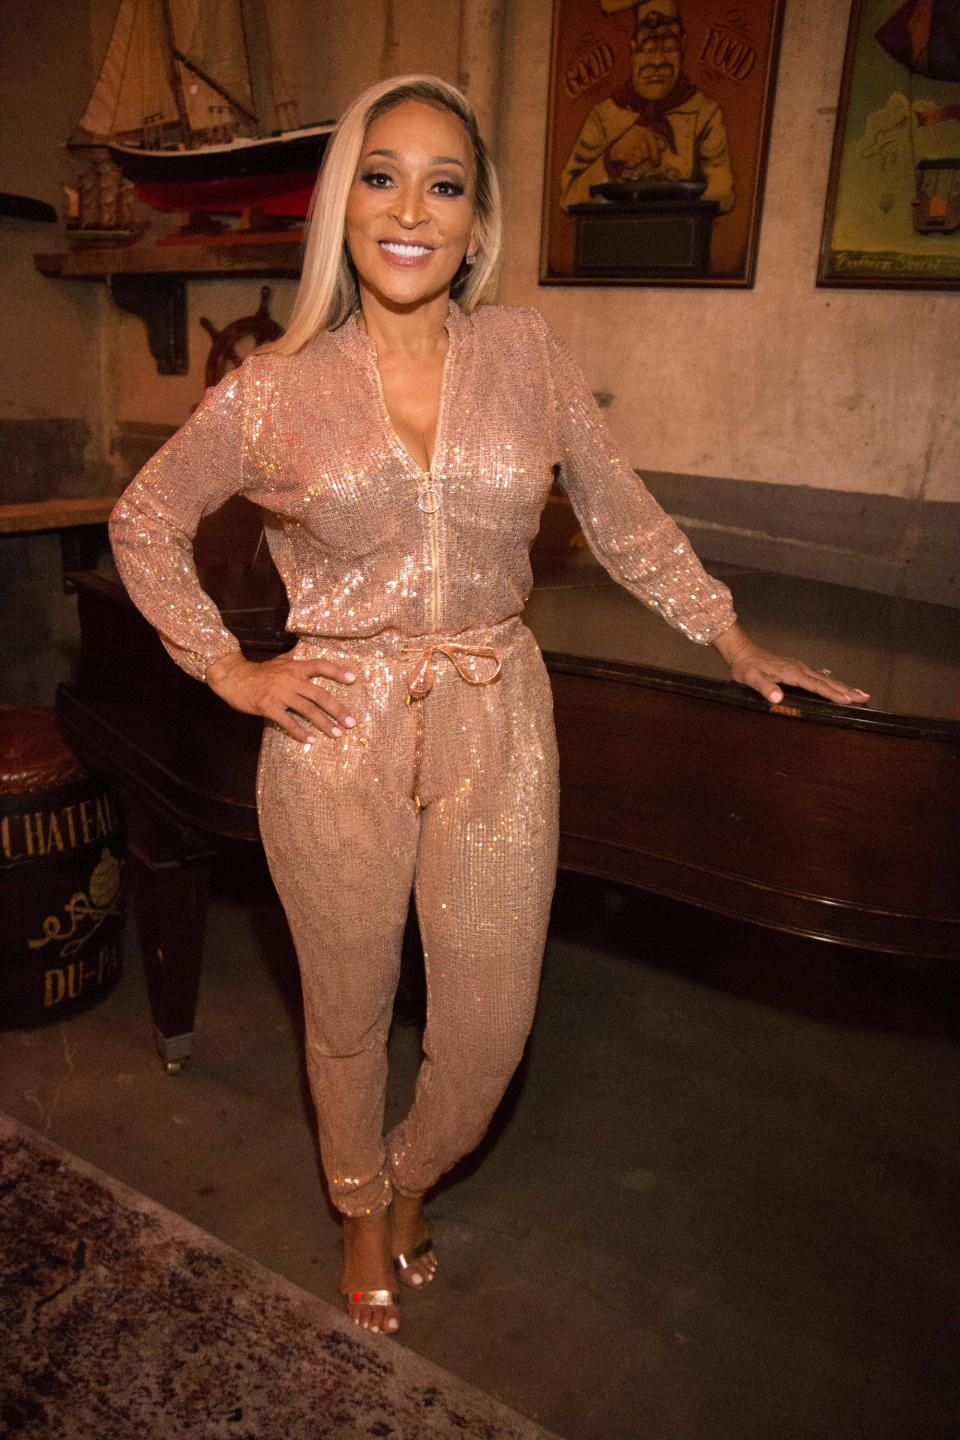 WASHINGTON, DC – APRIL 28: Karen Huger attends “Real Housewives Of Potomac” Premiere Party at The Hecht Warehouse at Ivy City on April 28, 2019 in Washington, DC. (Photo by Brian Stukes/Getty Images)